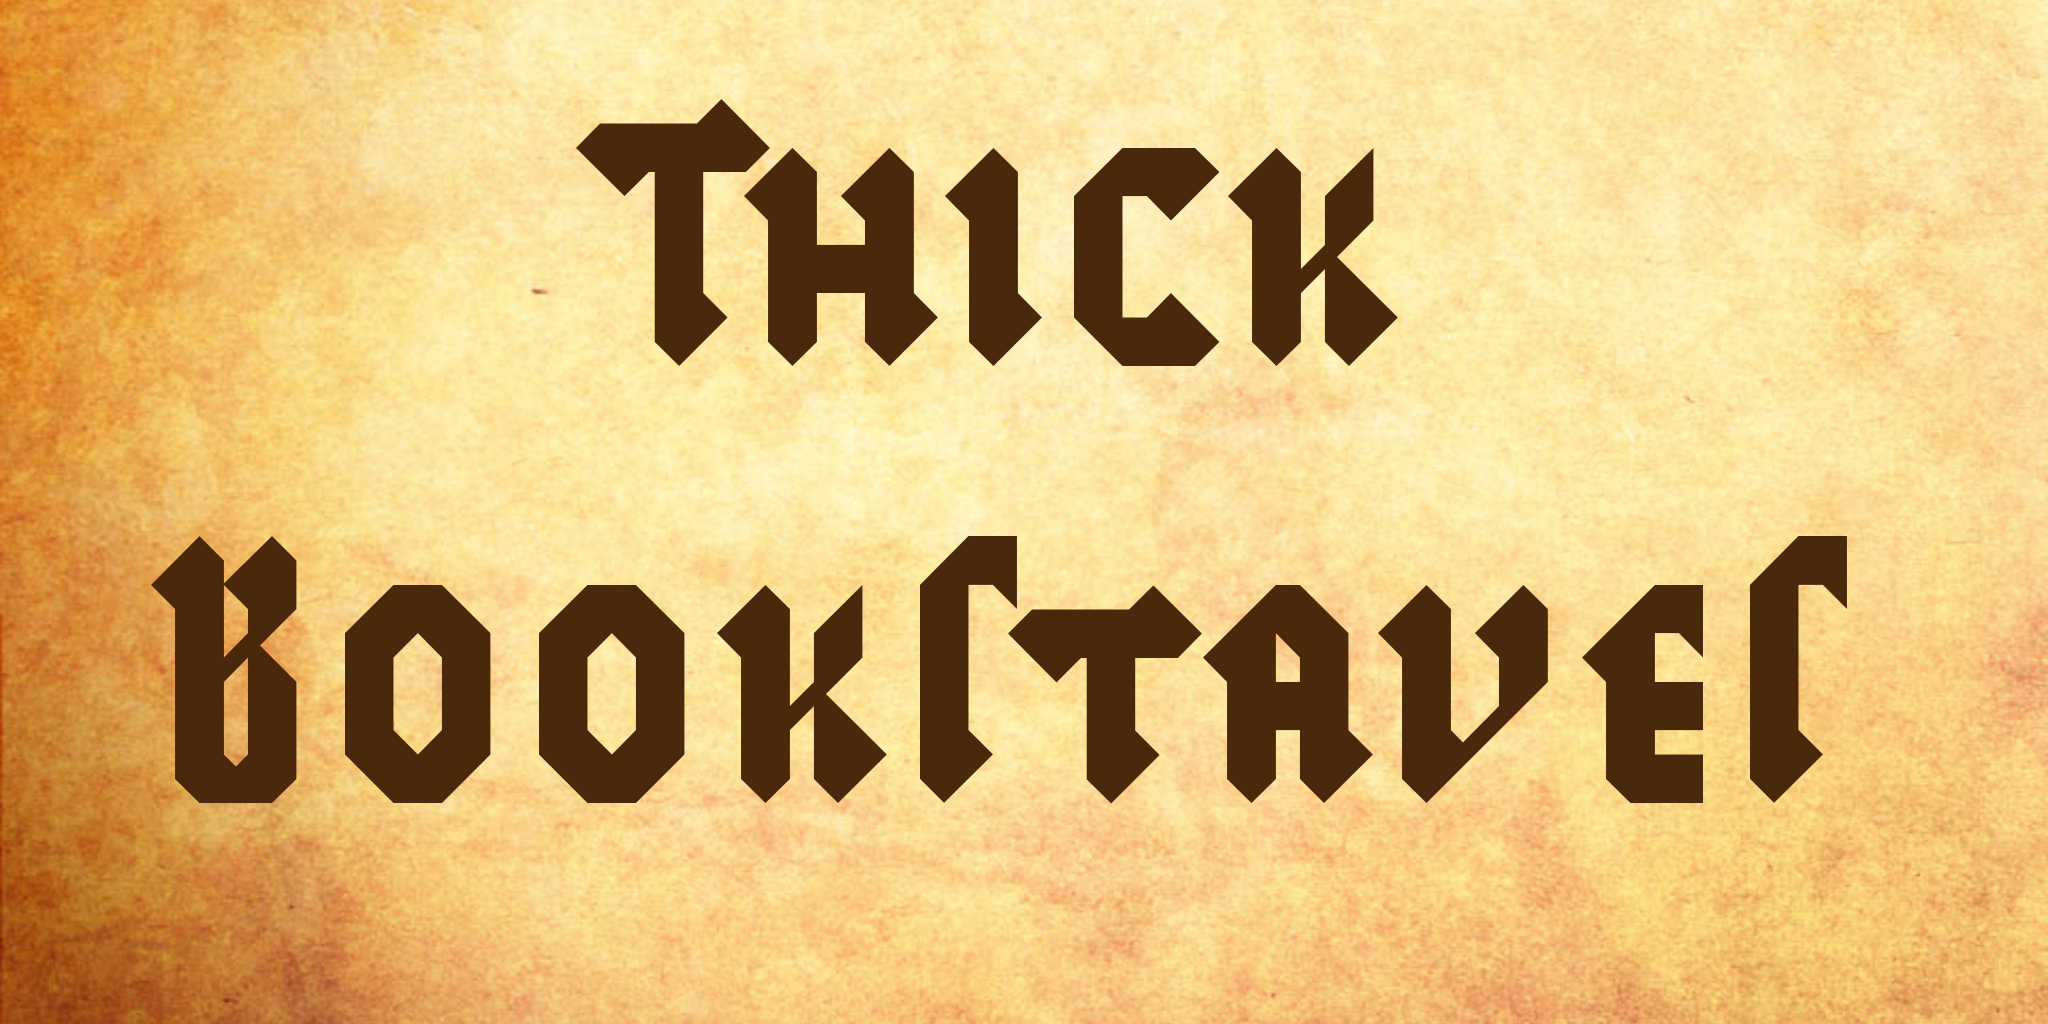 Thick Bookstaves